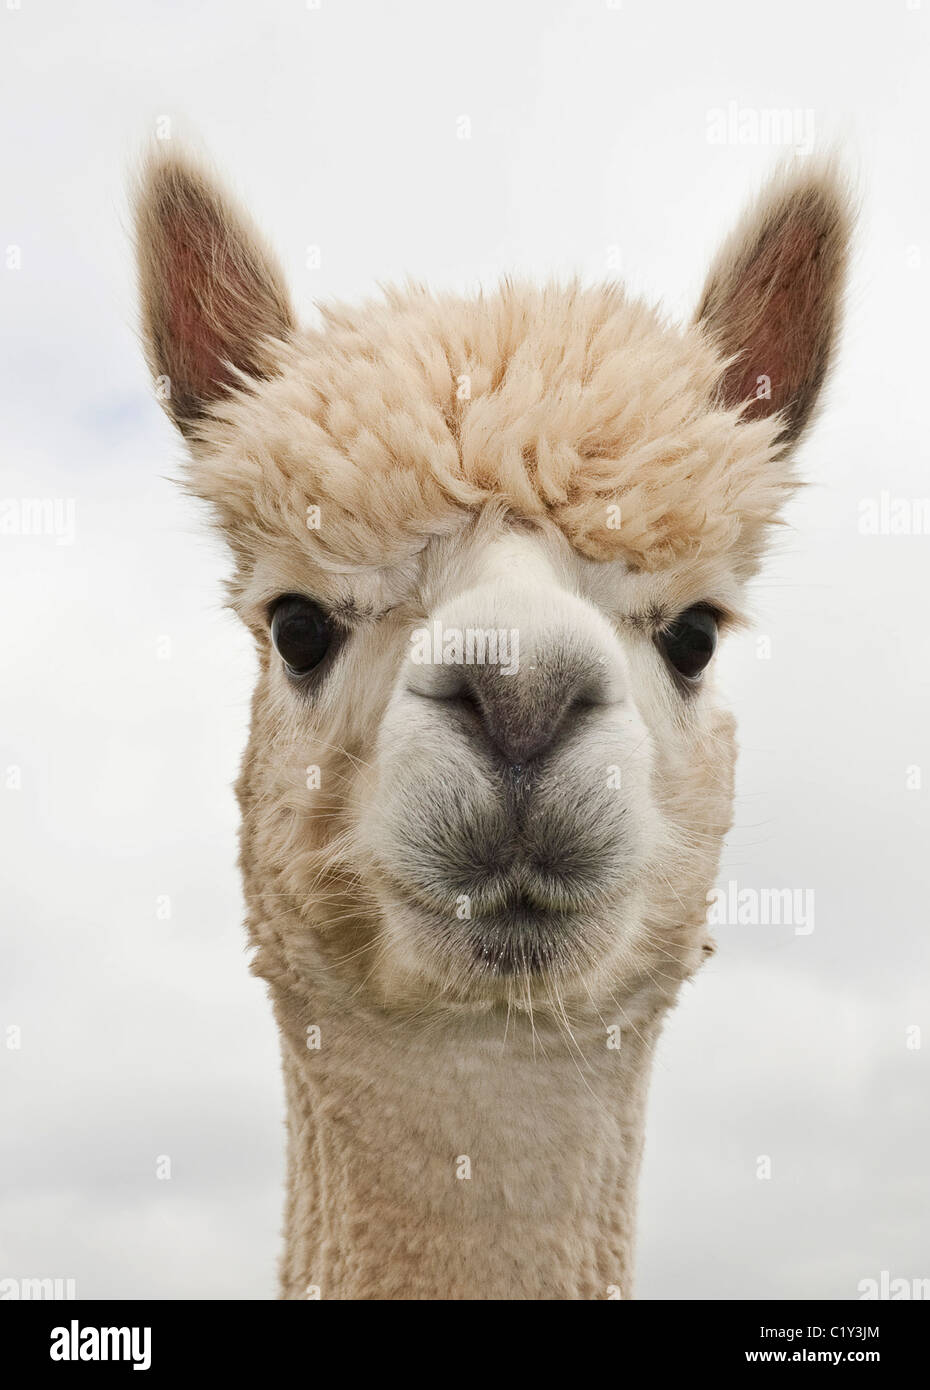 alpaca looking at camera.copy space.upright image Stock Photo